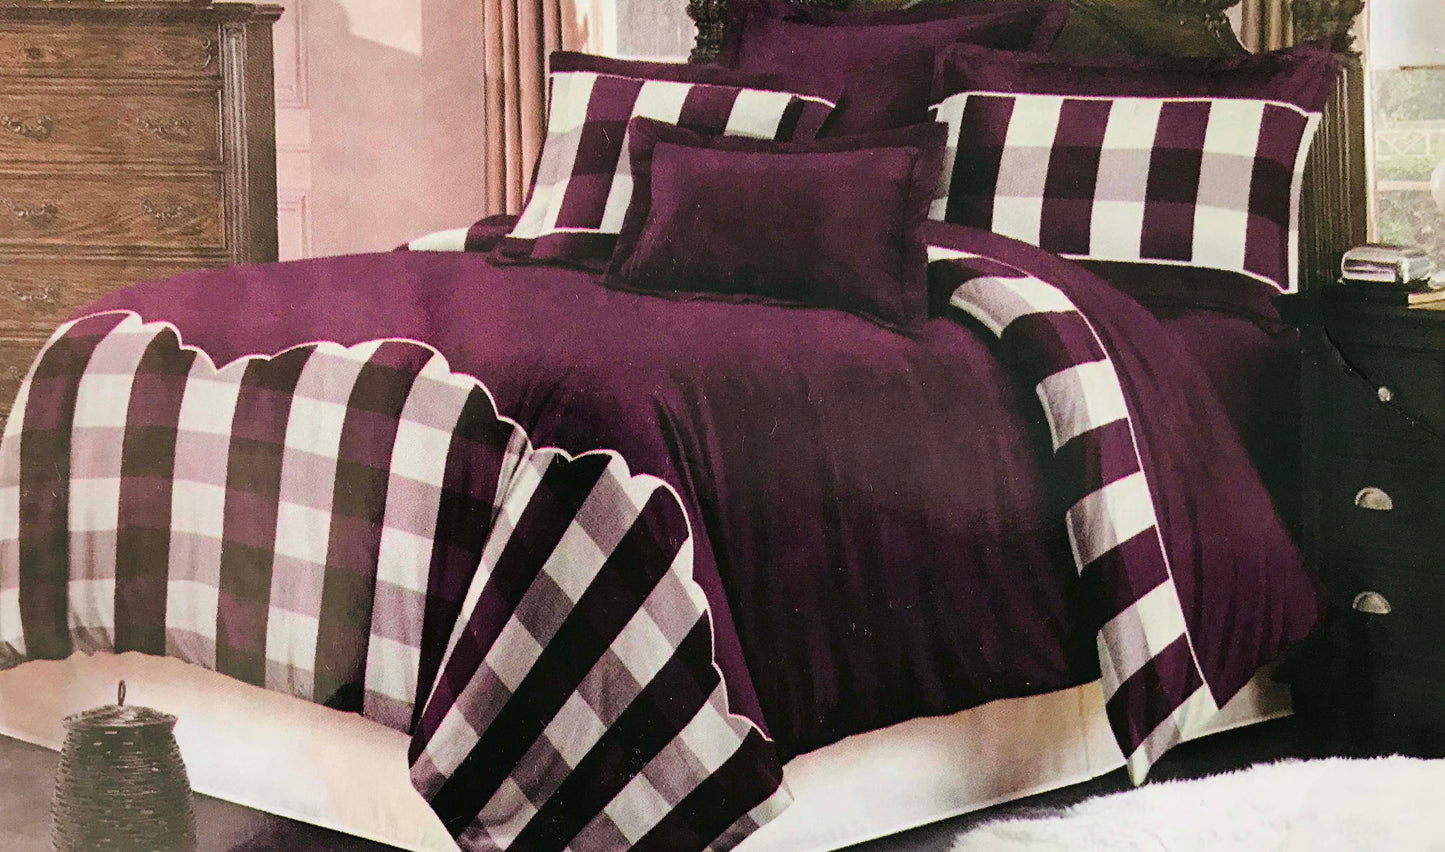 Quilted Bedspread Throw Comforter Bedding Sets Checks PURPLE